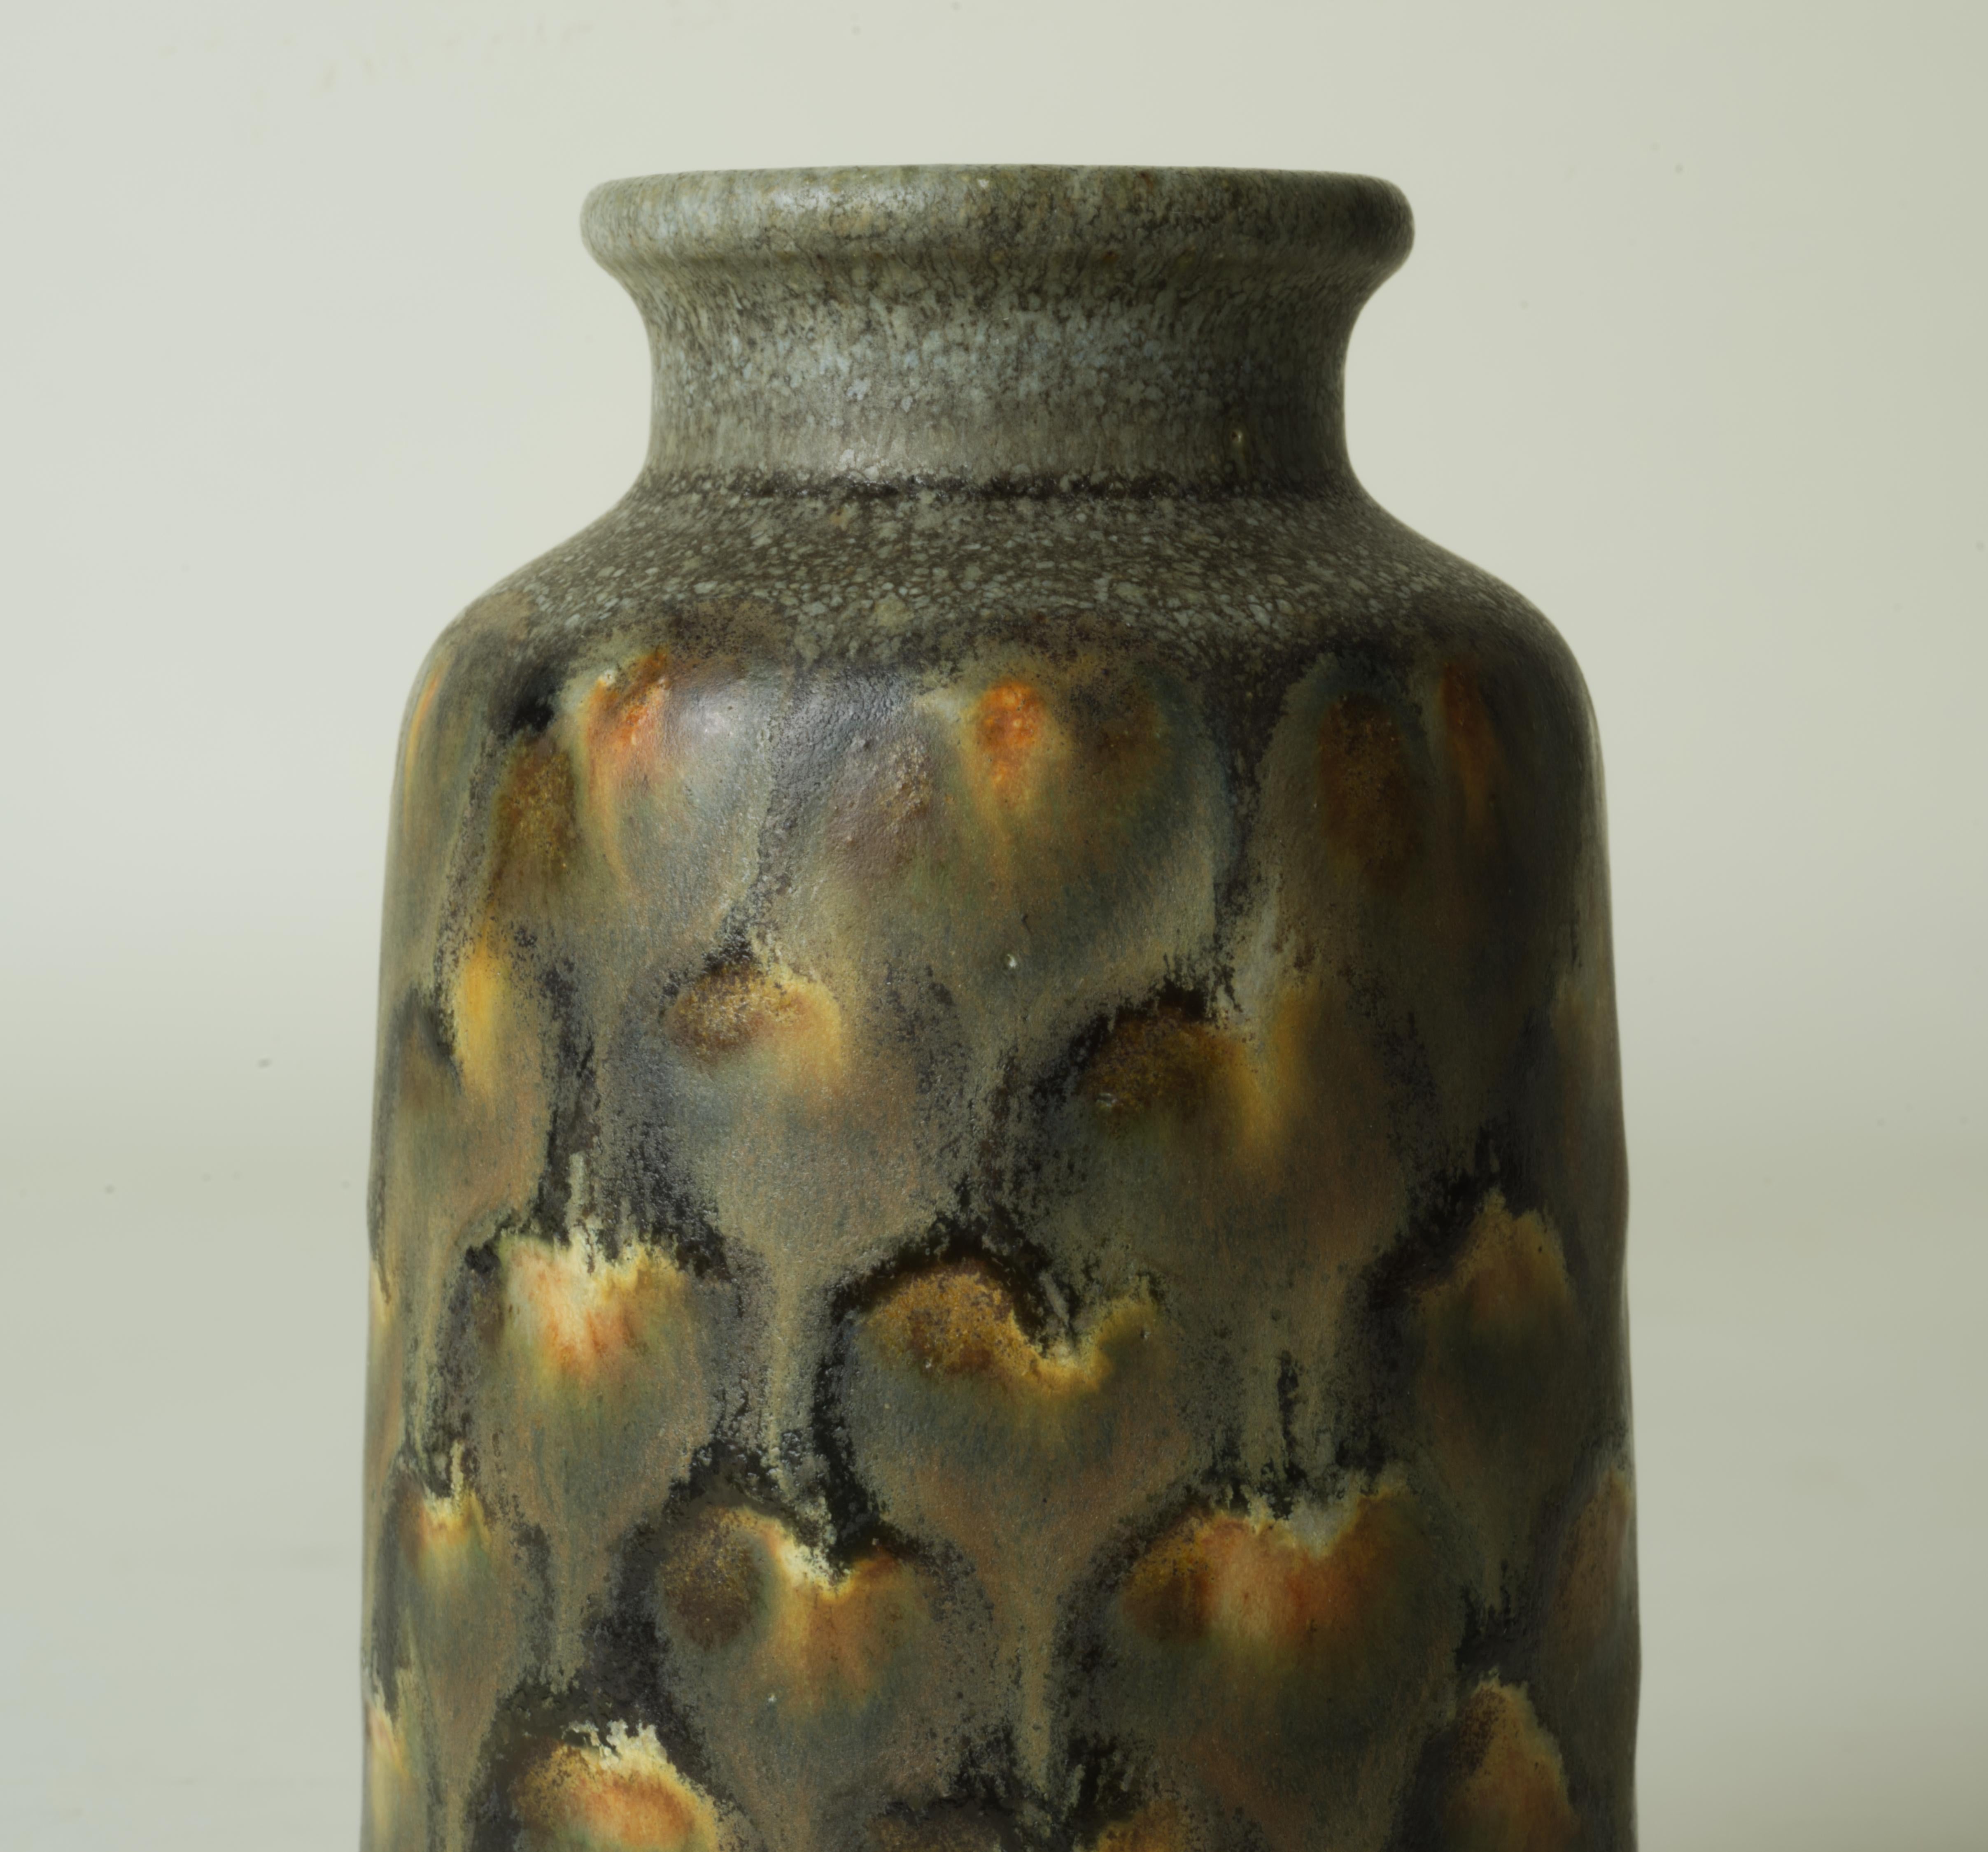 Small Studio Pottery Vase by Jim Fineman in Peacock Glaze In Excellent Condition For Sale In Clifton Springs, NY